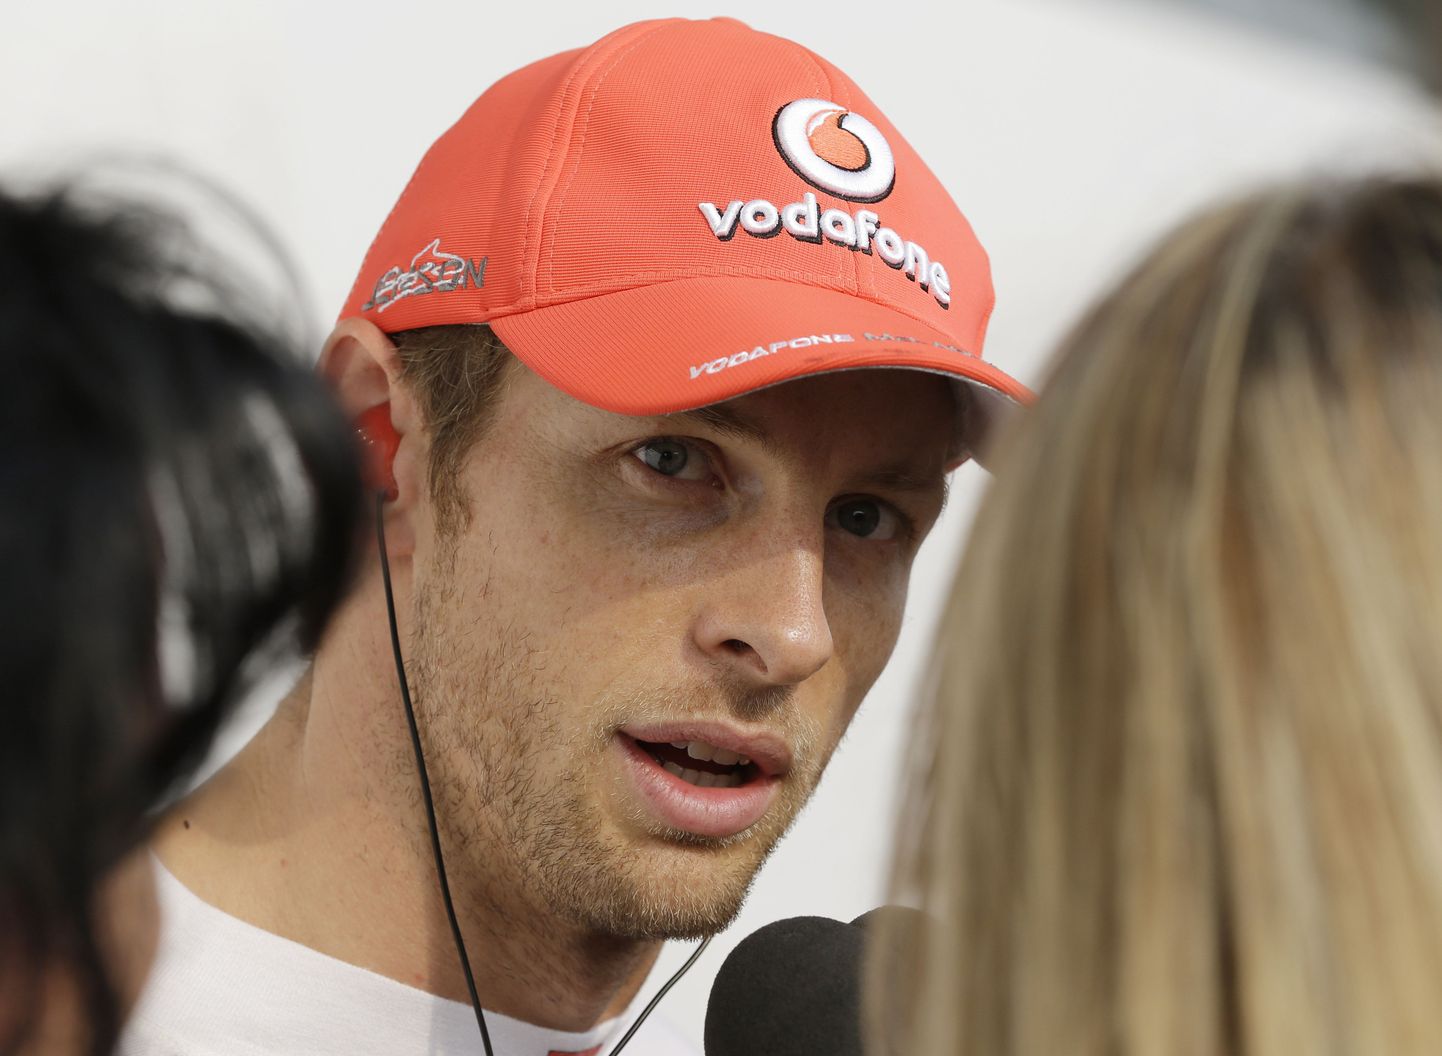 McLaren driver Jenson Button of Britain talks to reporters in the F1 paddock after he crashed out of the Korean Formula One Grand Prix at the Korean International Circuit in Yeongam, South Korea, Sunday, Oct. 14, 2012. (AP Photo/Mark Baker) / SCANPIX Code: 436